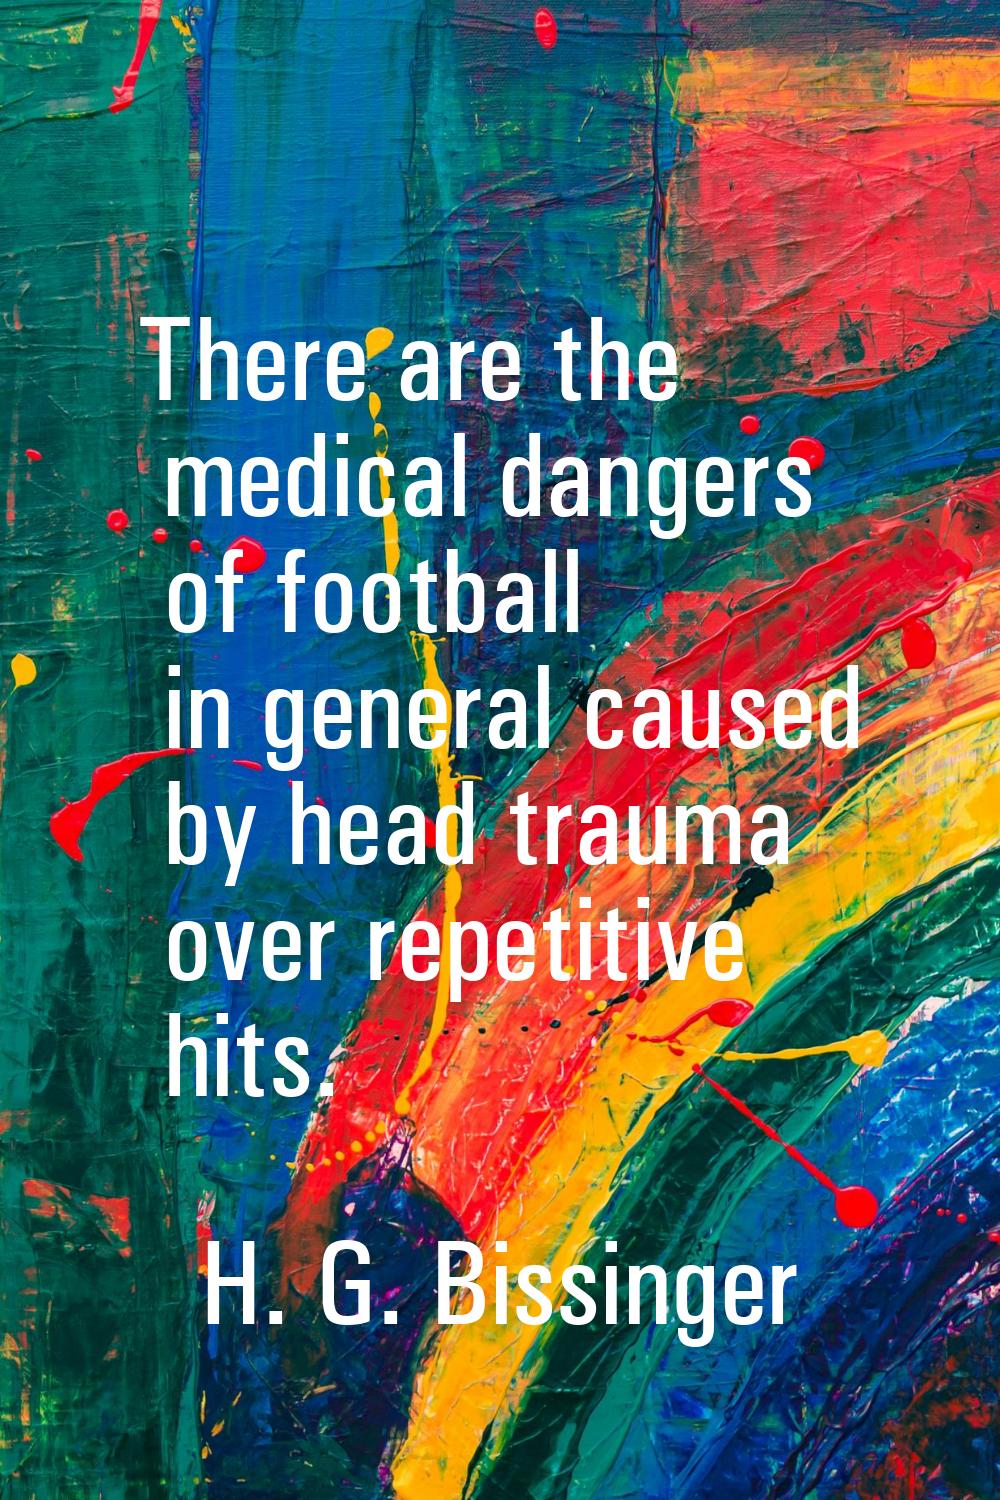 There are the medical dangers of football in general caused by head trauma over repetitive hits.